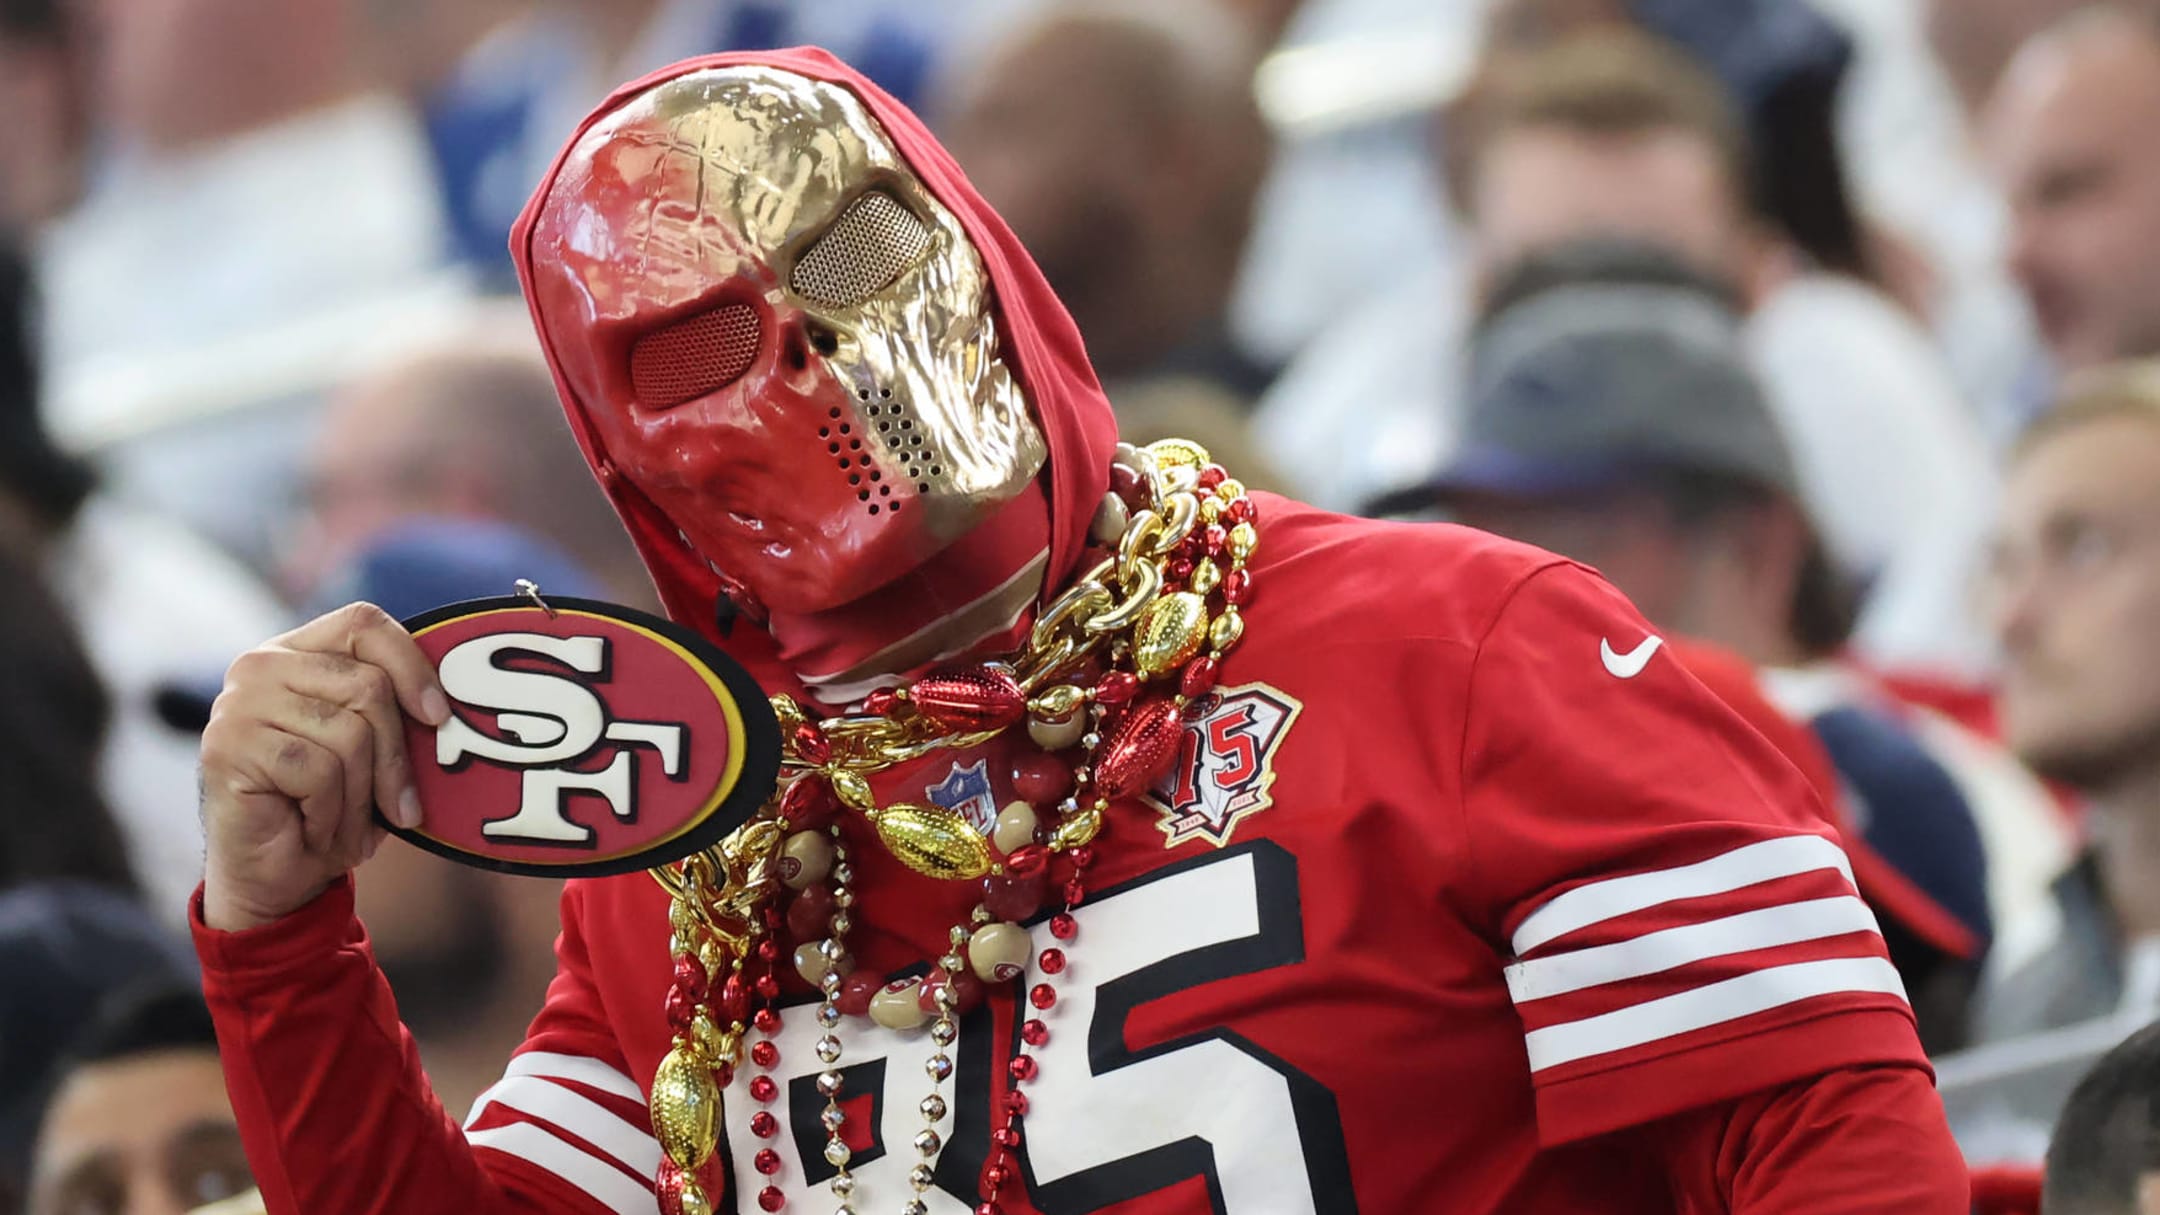 49ers Fans Take Over SoFi Stadium For NFC Championship Game